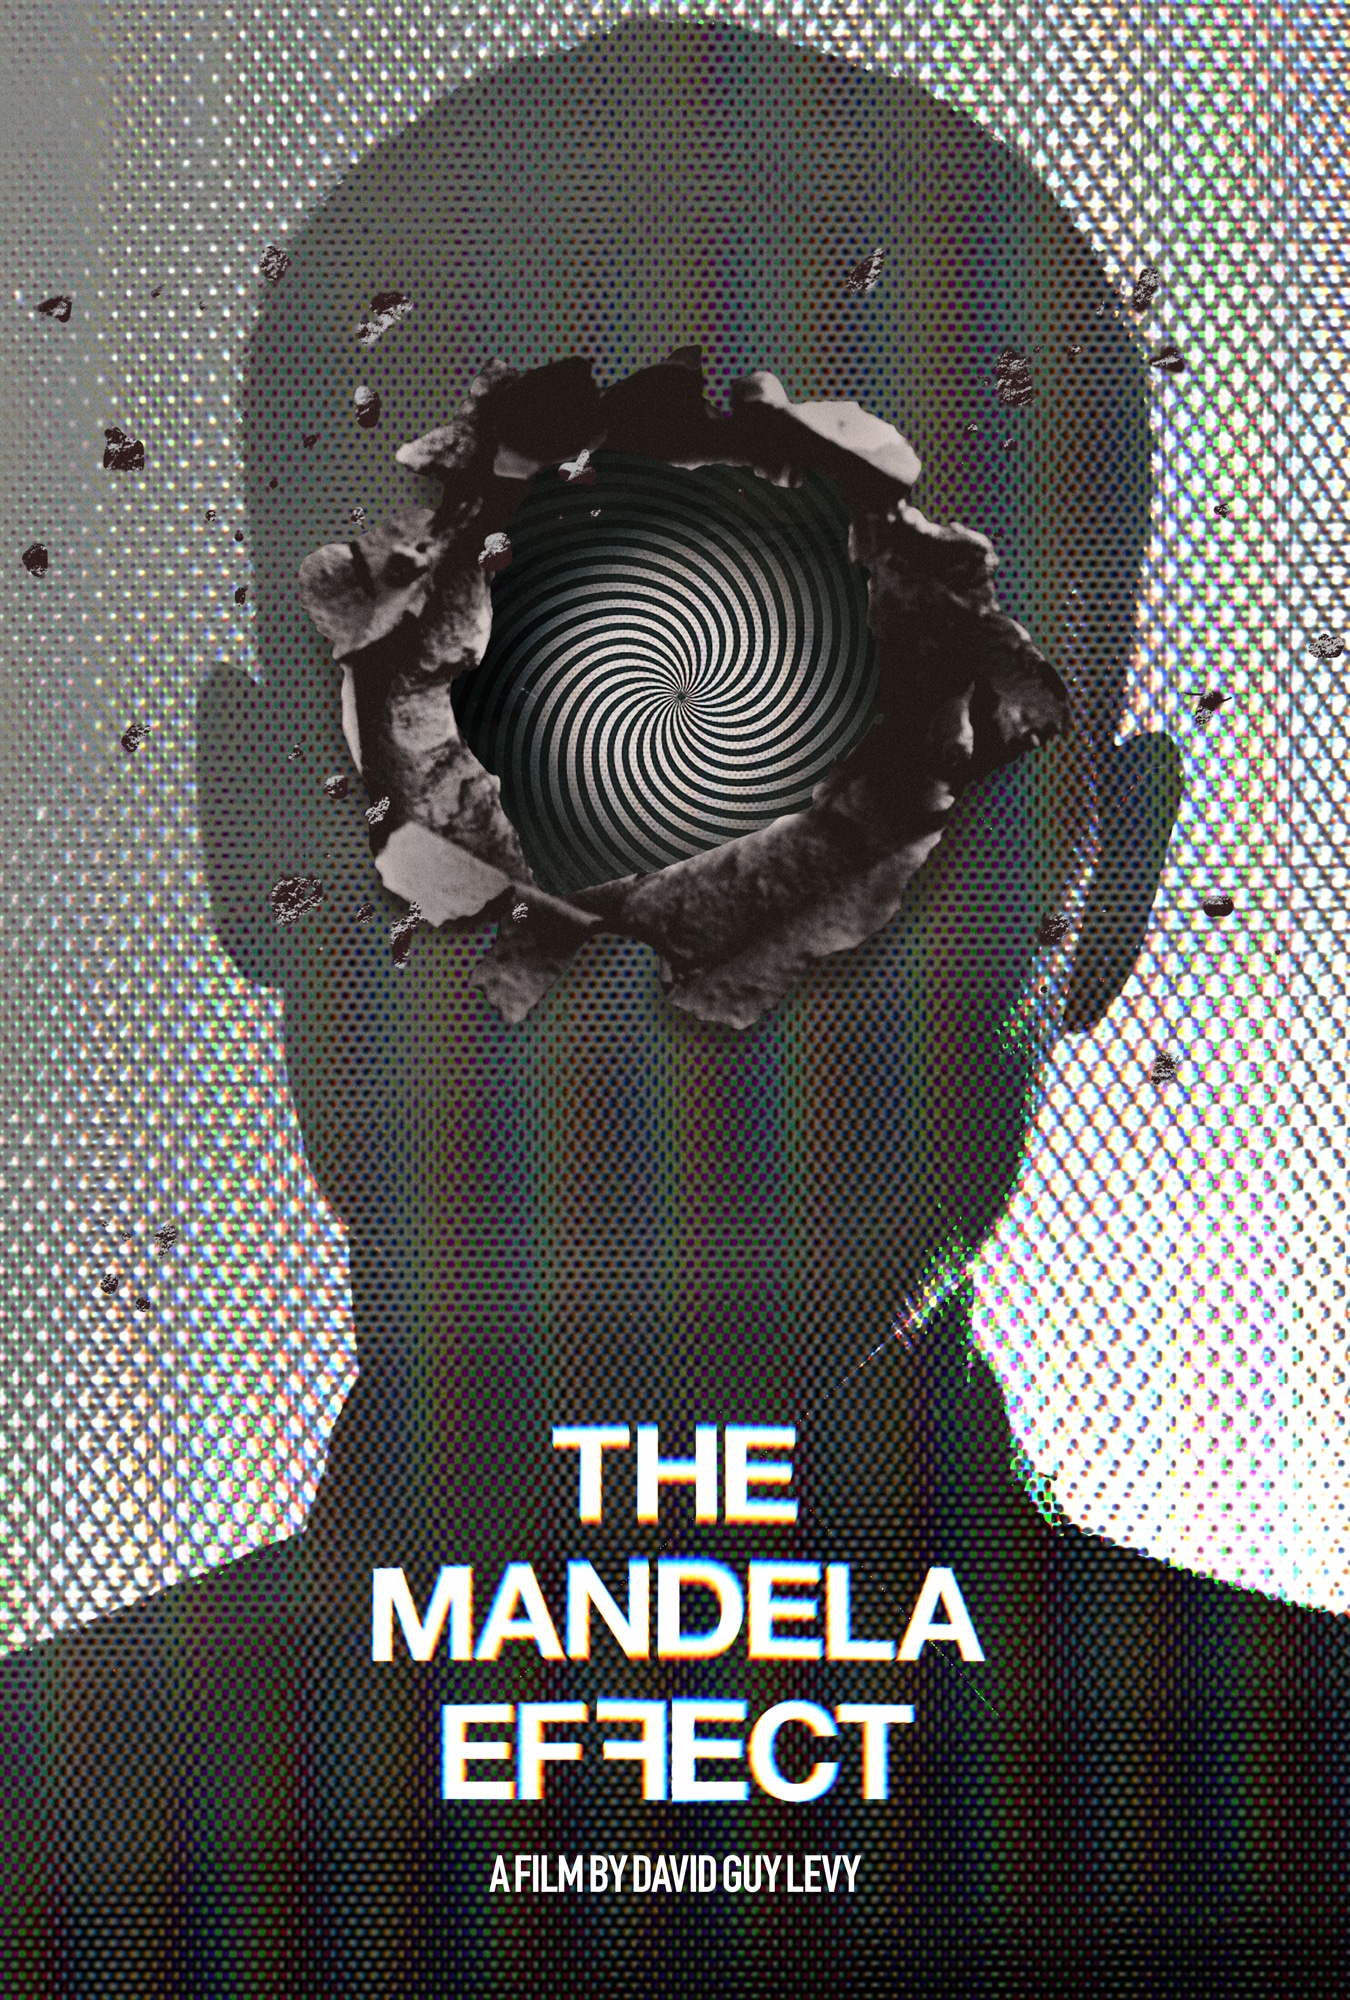 Geek insider, geekinsider, geekinsider. Com,, exclusive interview with the cast of ‘the mandela effect’, entertainment